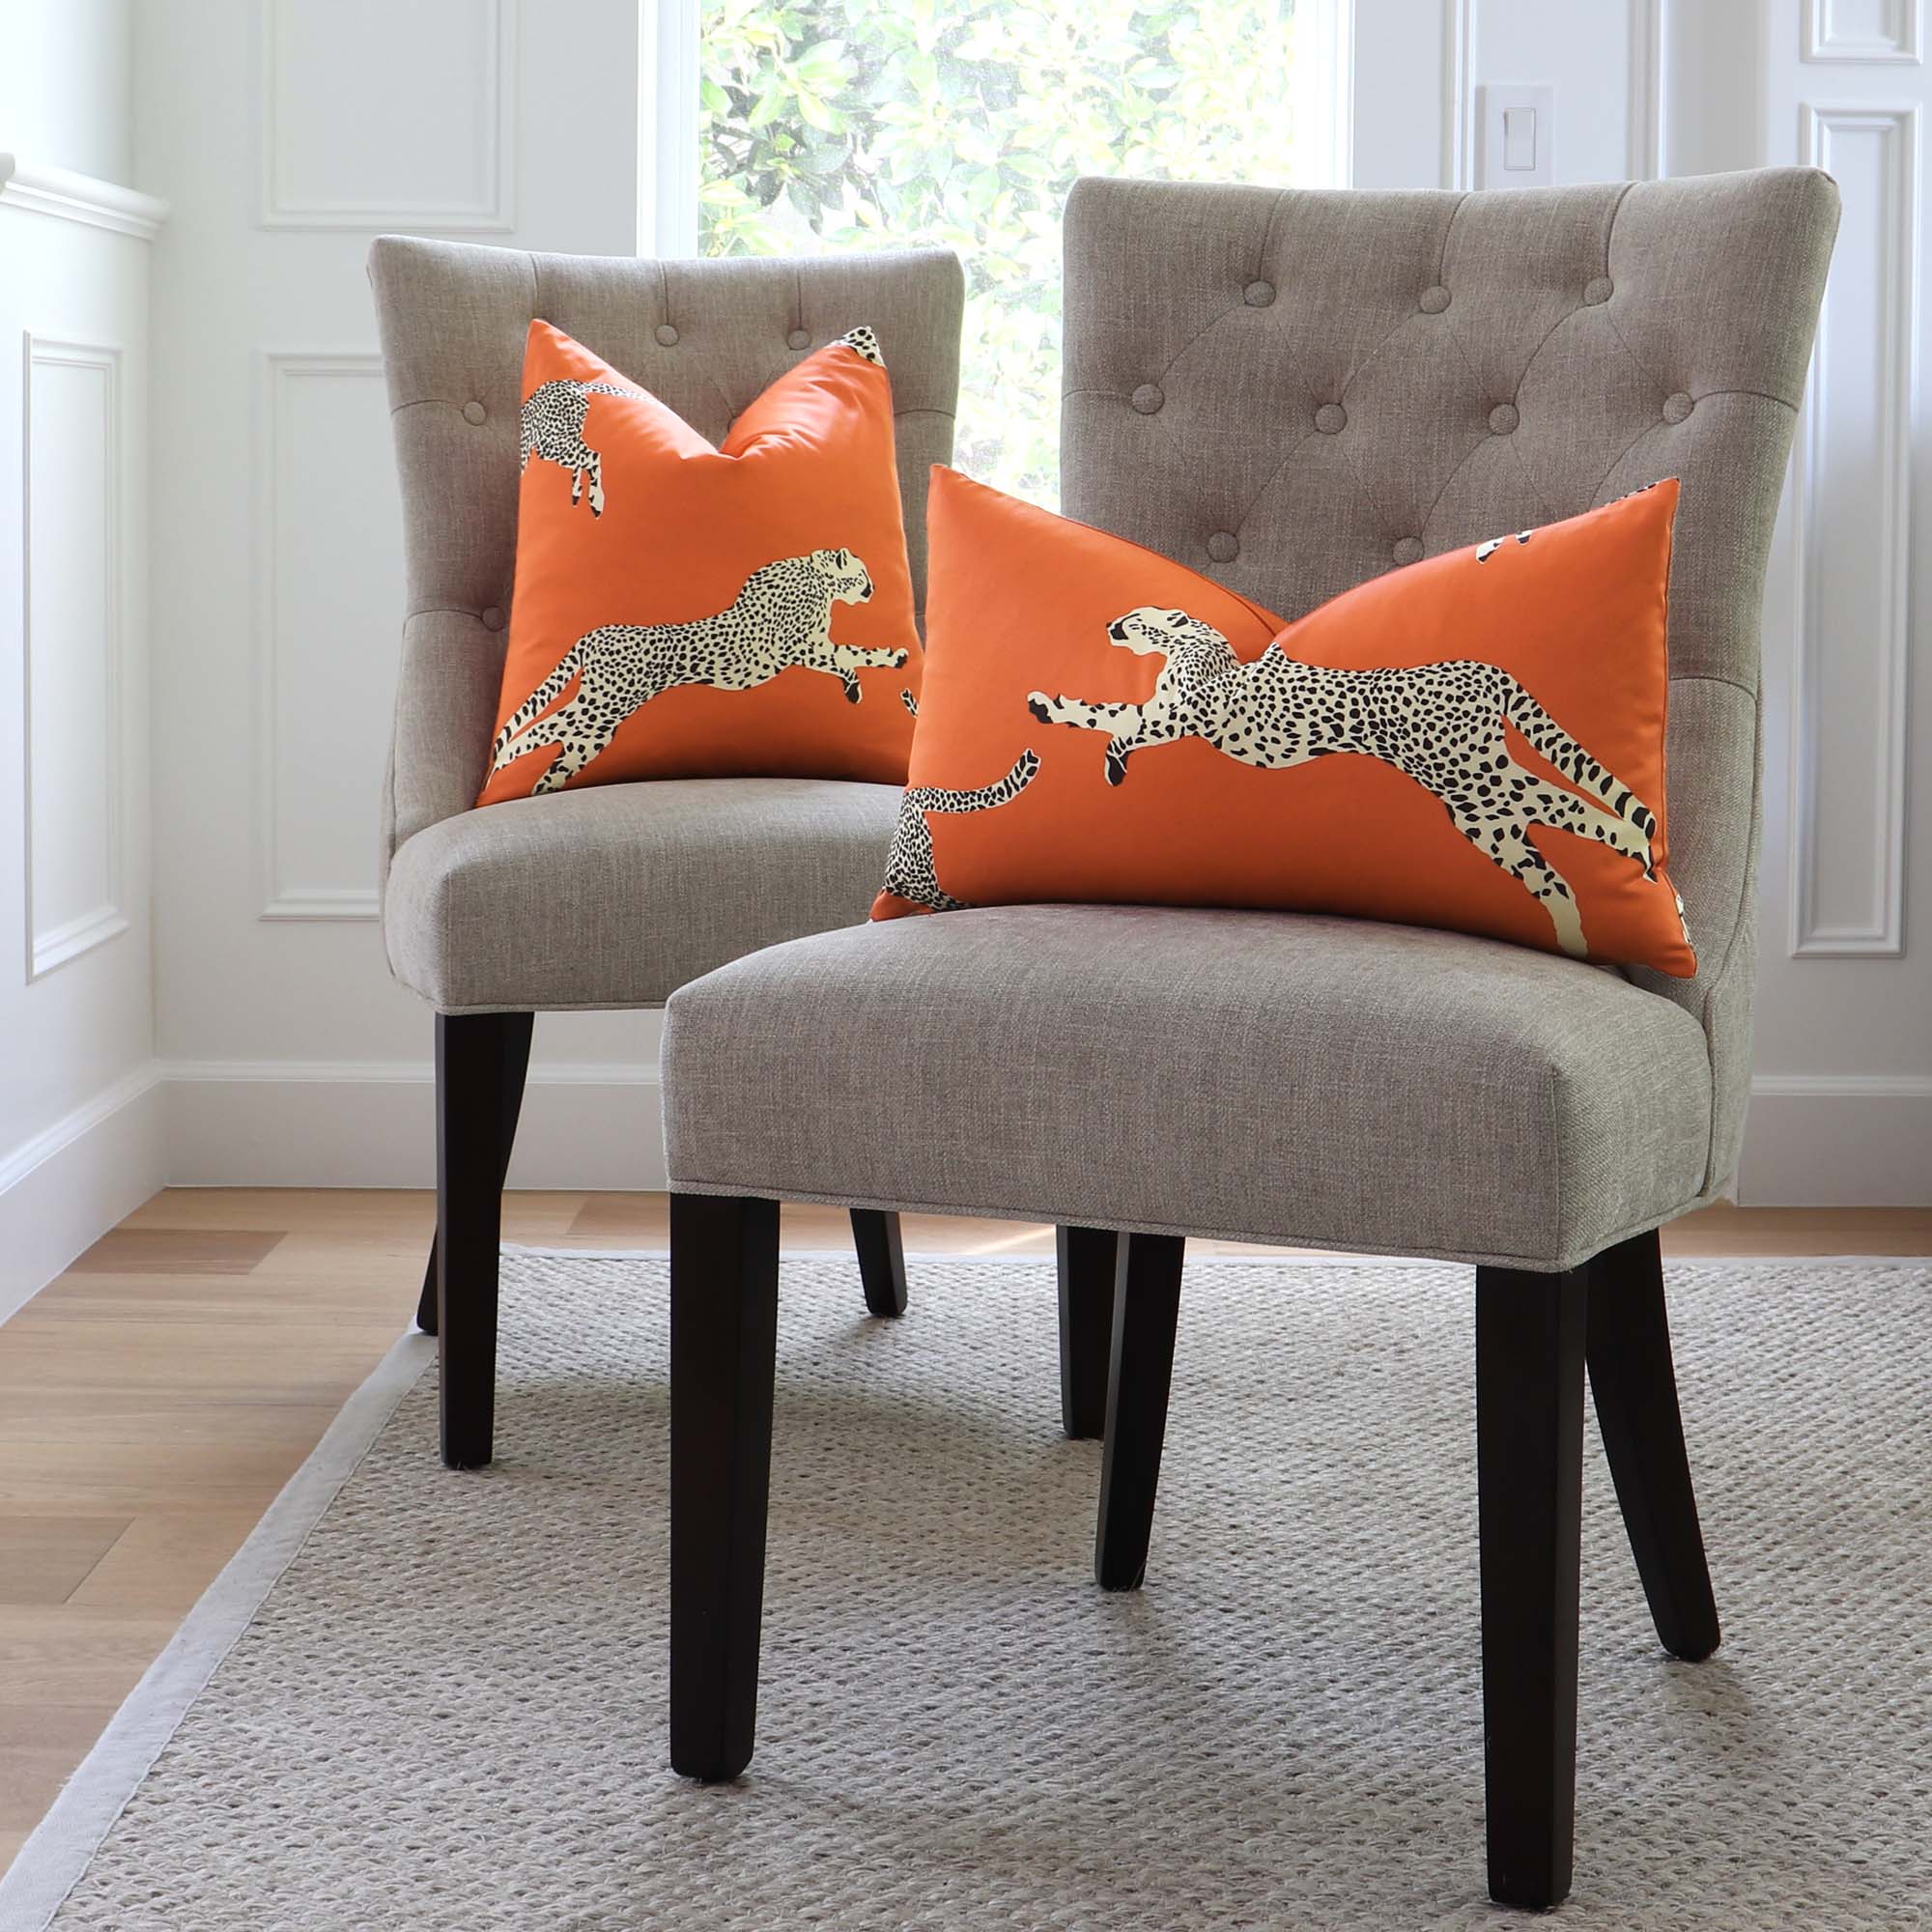 Scalamandre Leaping Cheetah Clementine Orange Luxury Throw Pillow Cover on Dining Chairs in Home